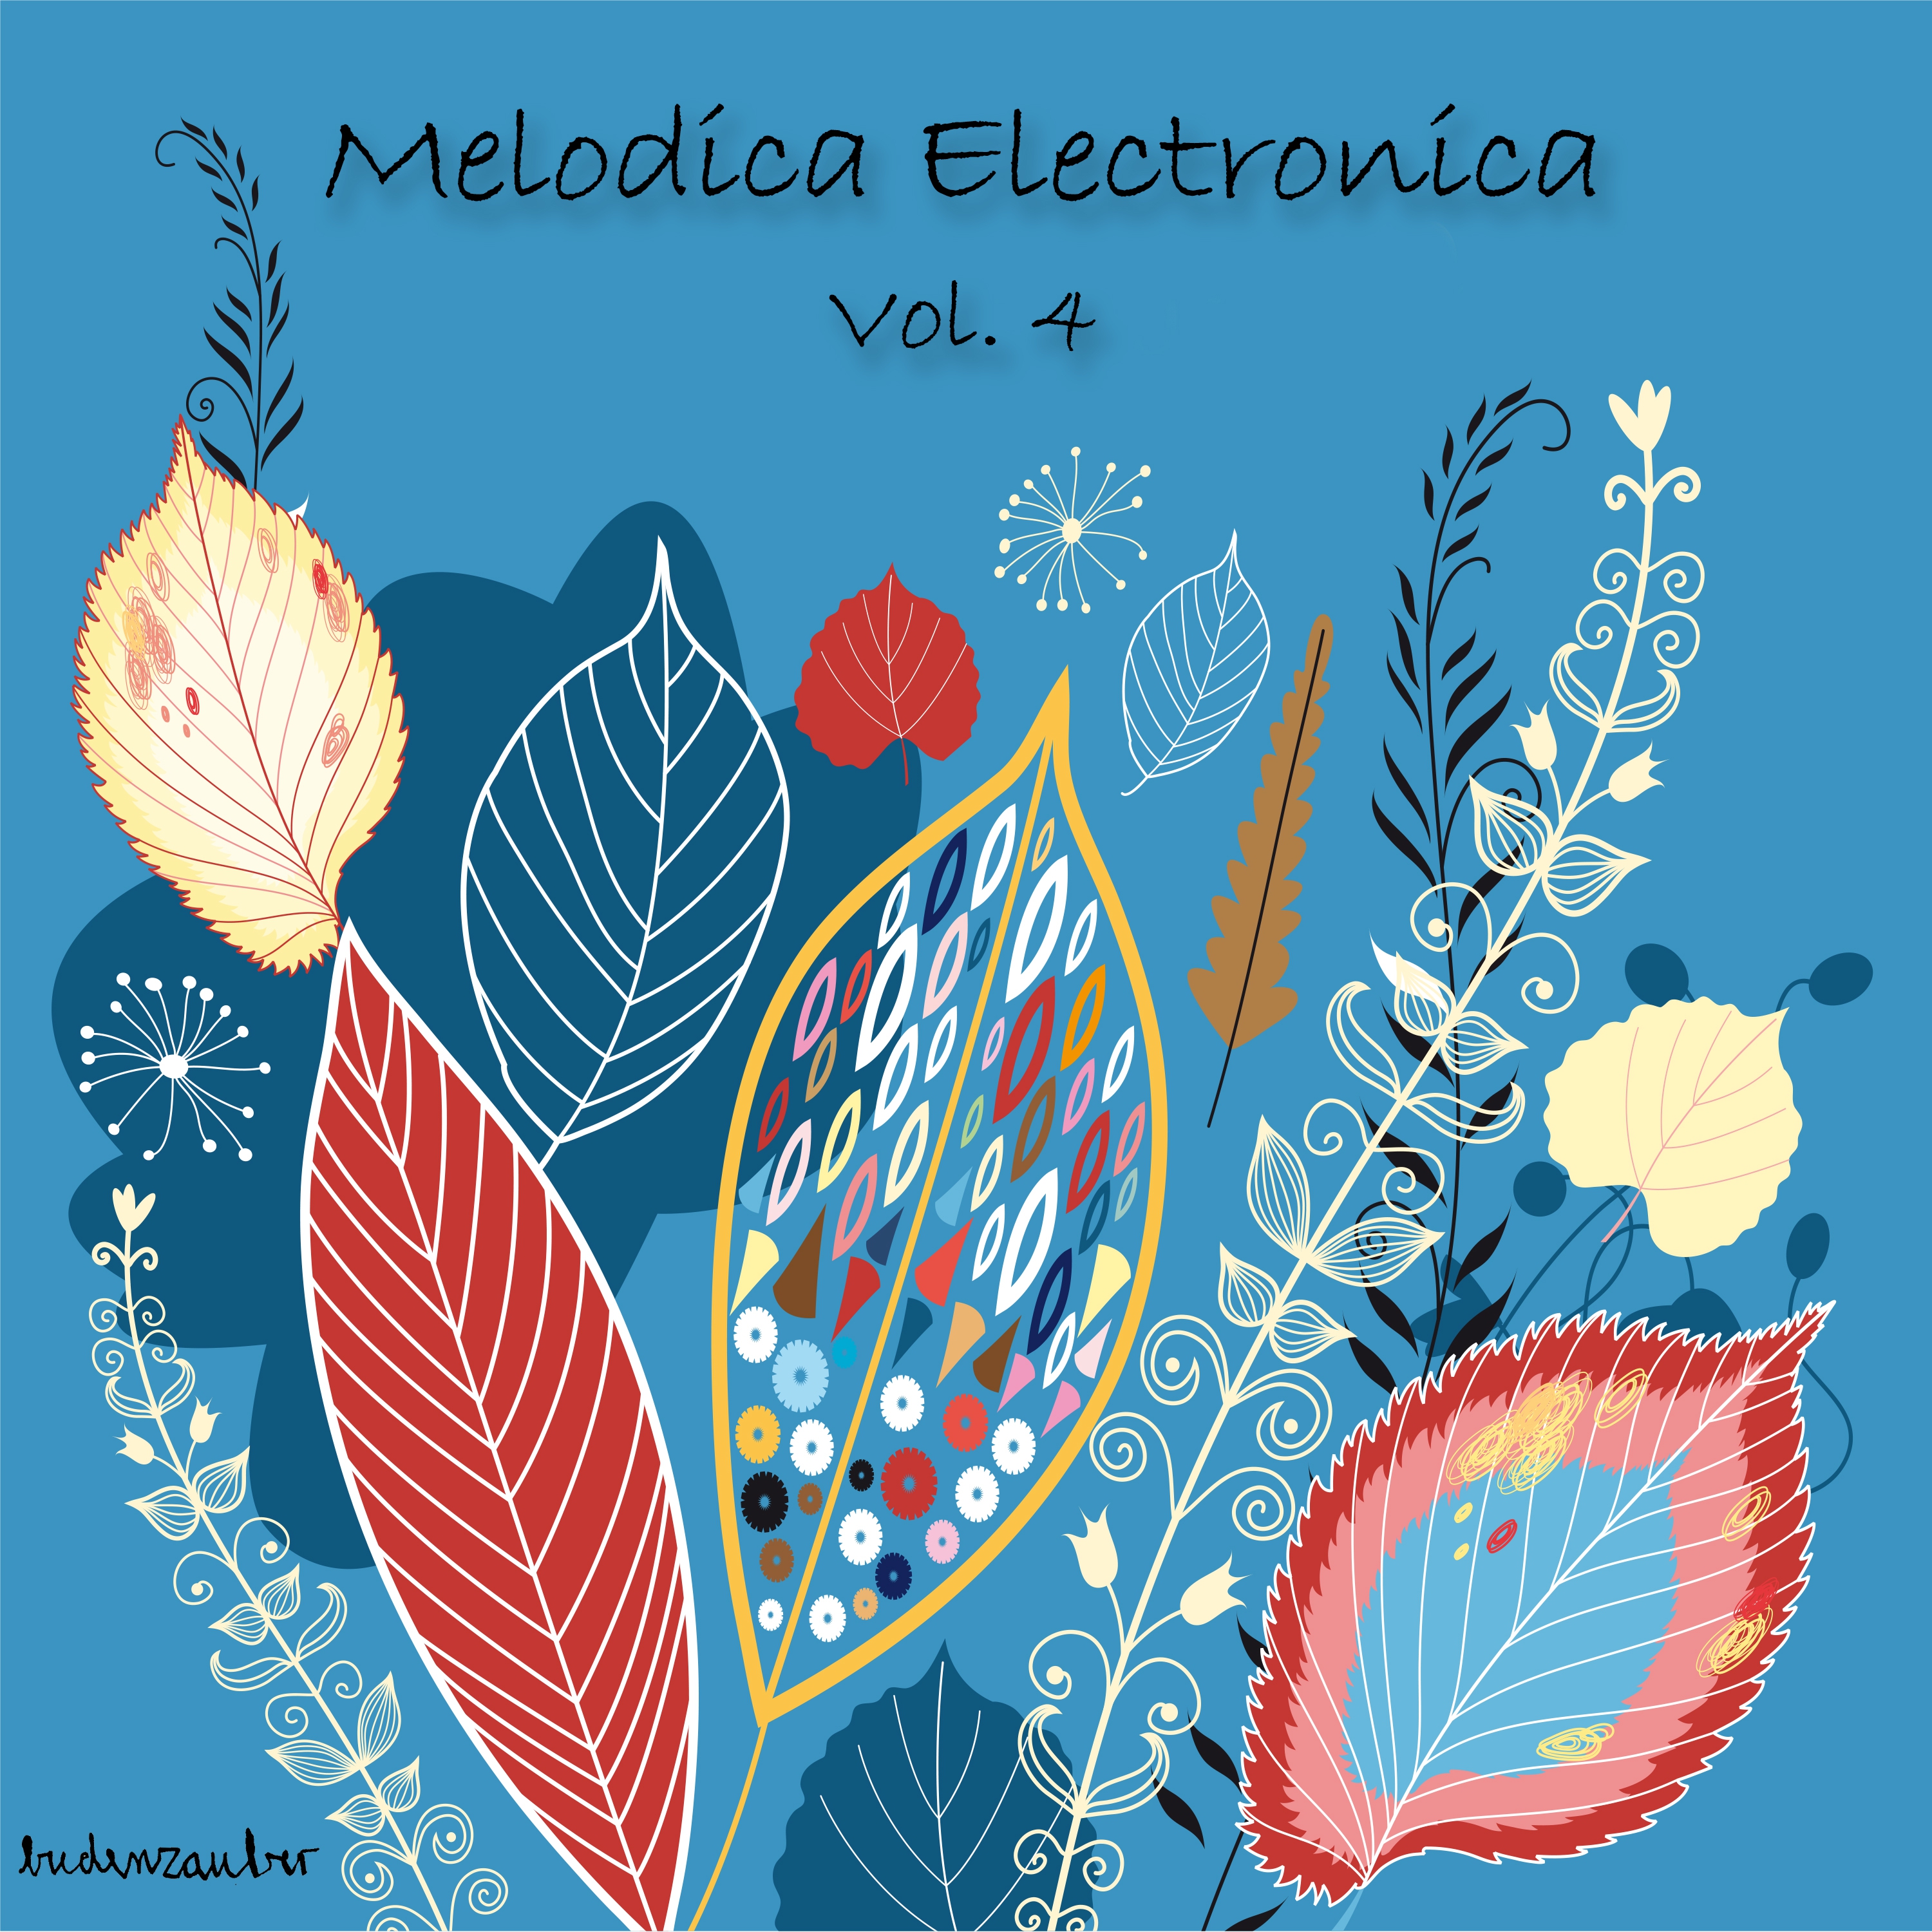 Melodica Electronica, Vol. 4